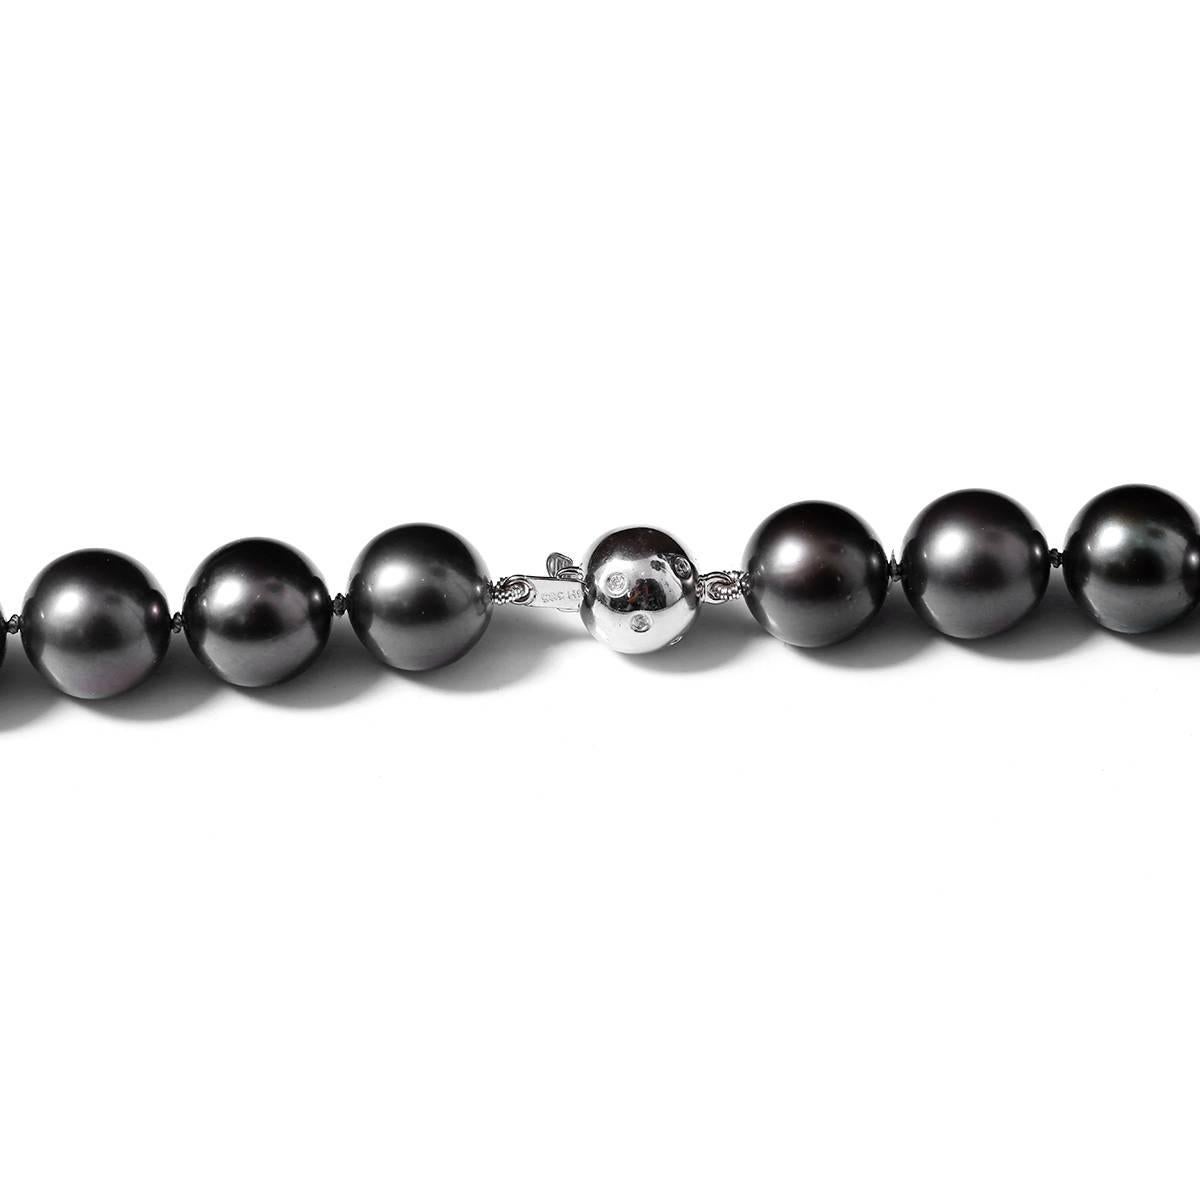 Women's Stunning Ombre South Sea Pearl Necklace